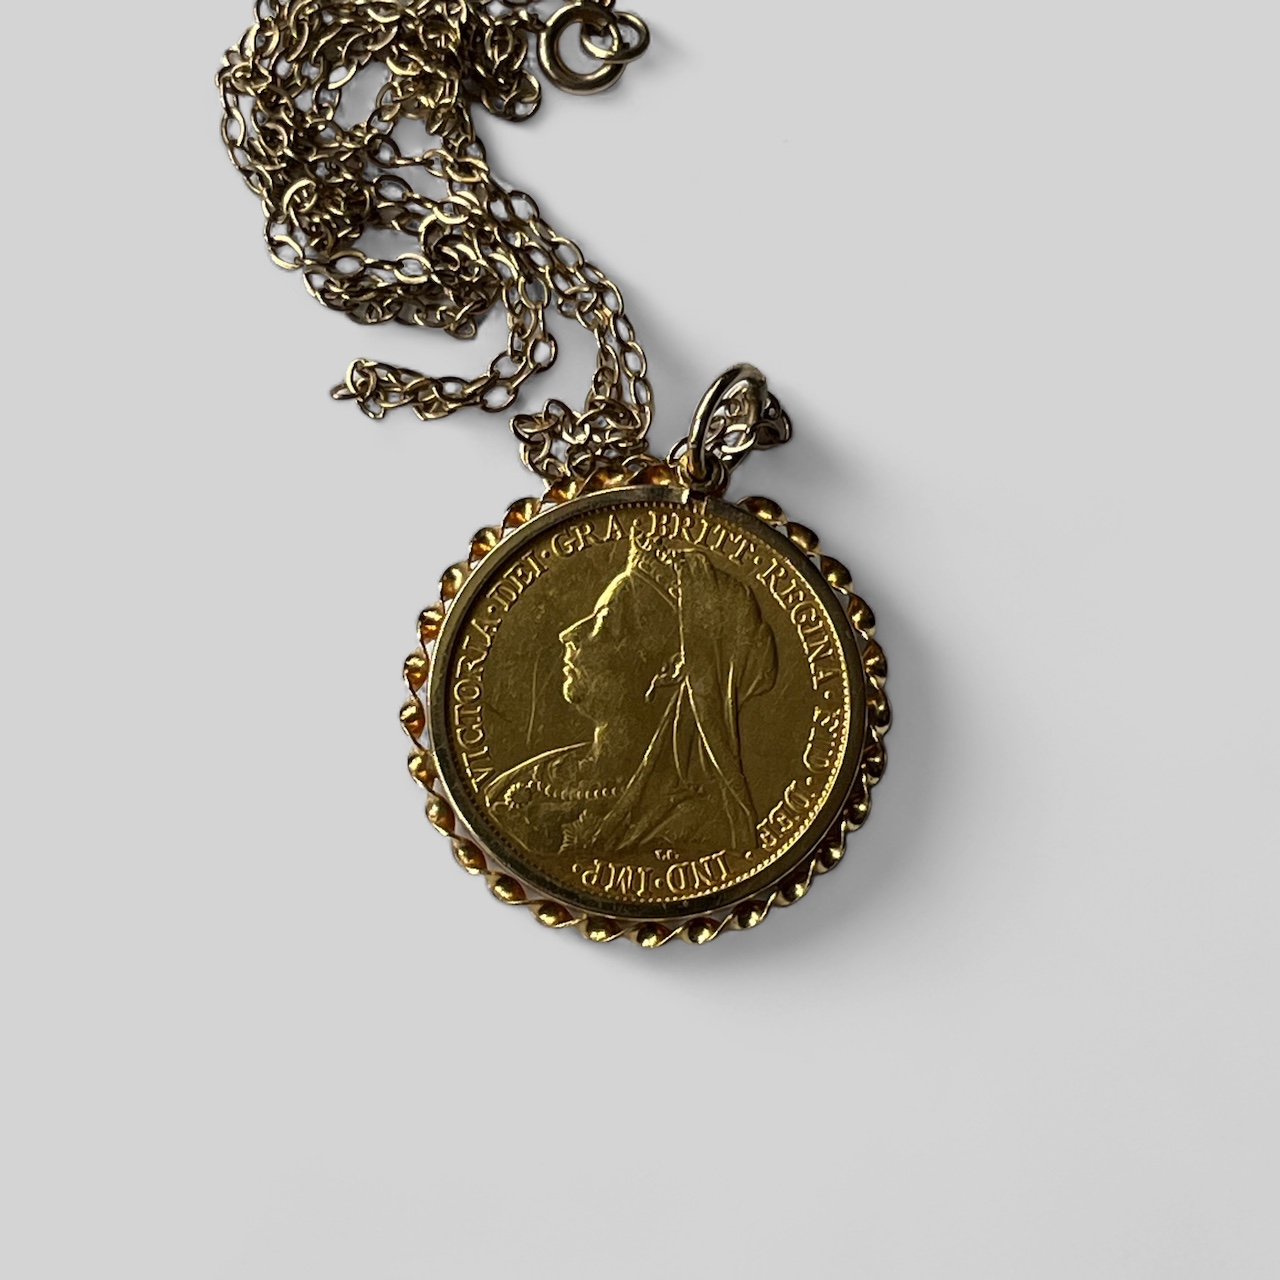 Queen Victoria 1900 full gold sovereign coin, loose mounted in 9ct gold pendant necklace, 10.5g - Bild 2 aus 2